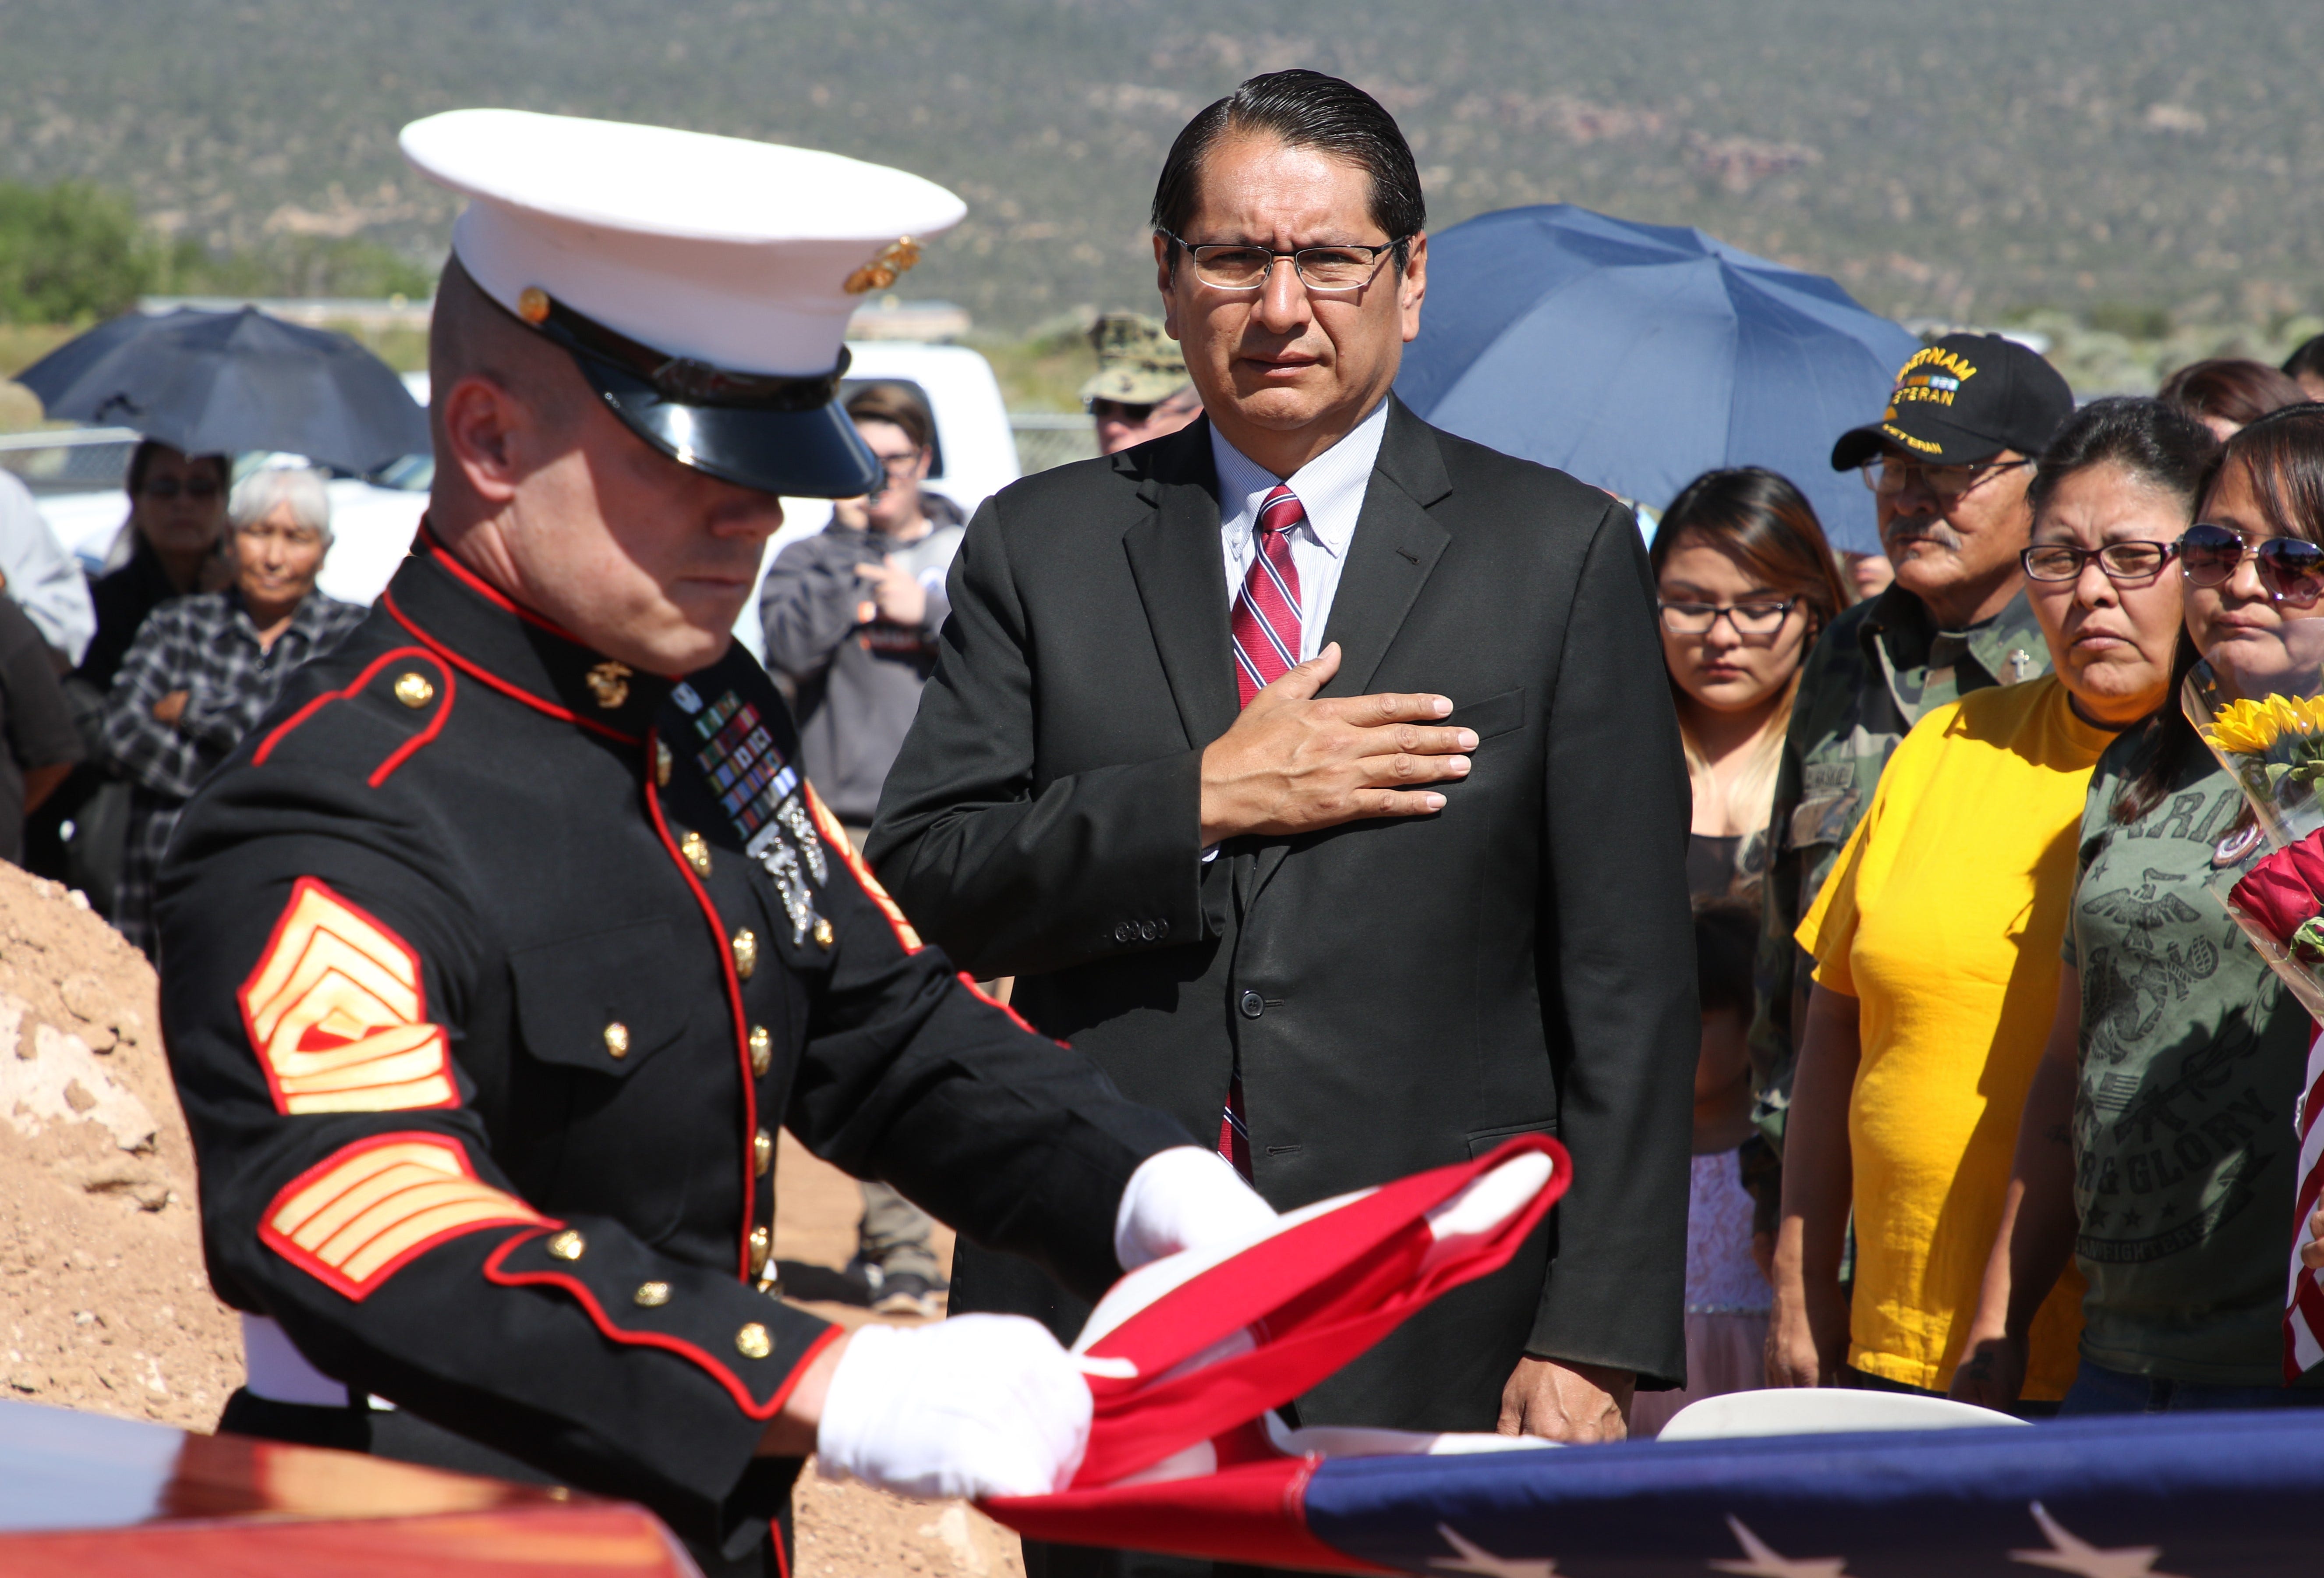 Navajo Nation President Jonathan Nez watches a U.S. Marine Corps member fold the burial flag for Navajo Code Talker William Tully Brown Sr. on June 6 at the Fort Defiance Veterans Cemetery in Fort Defiance, Ariz.